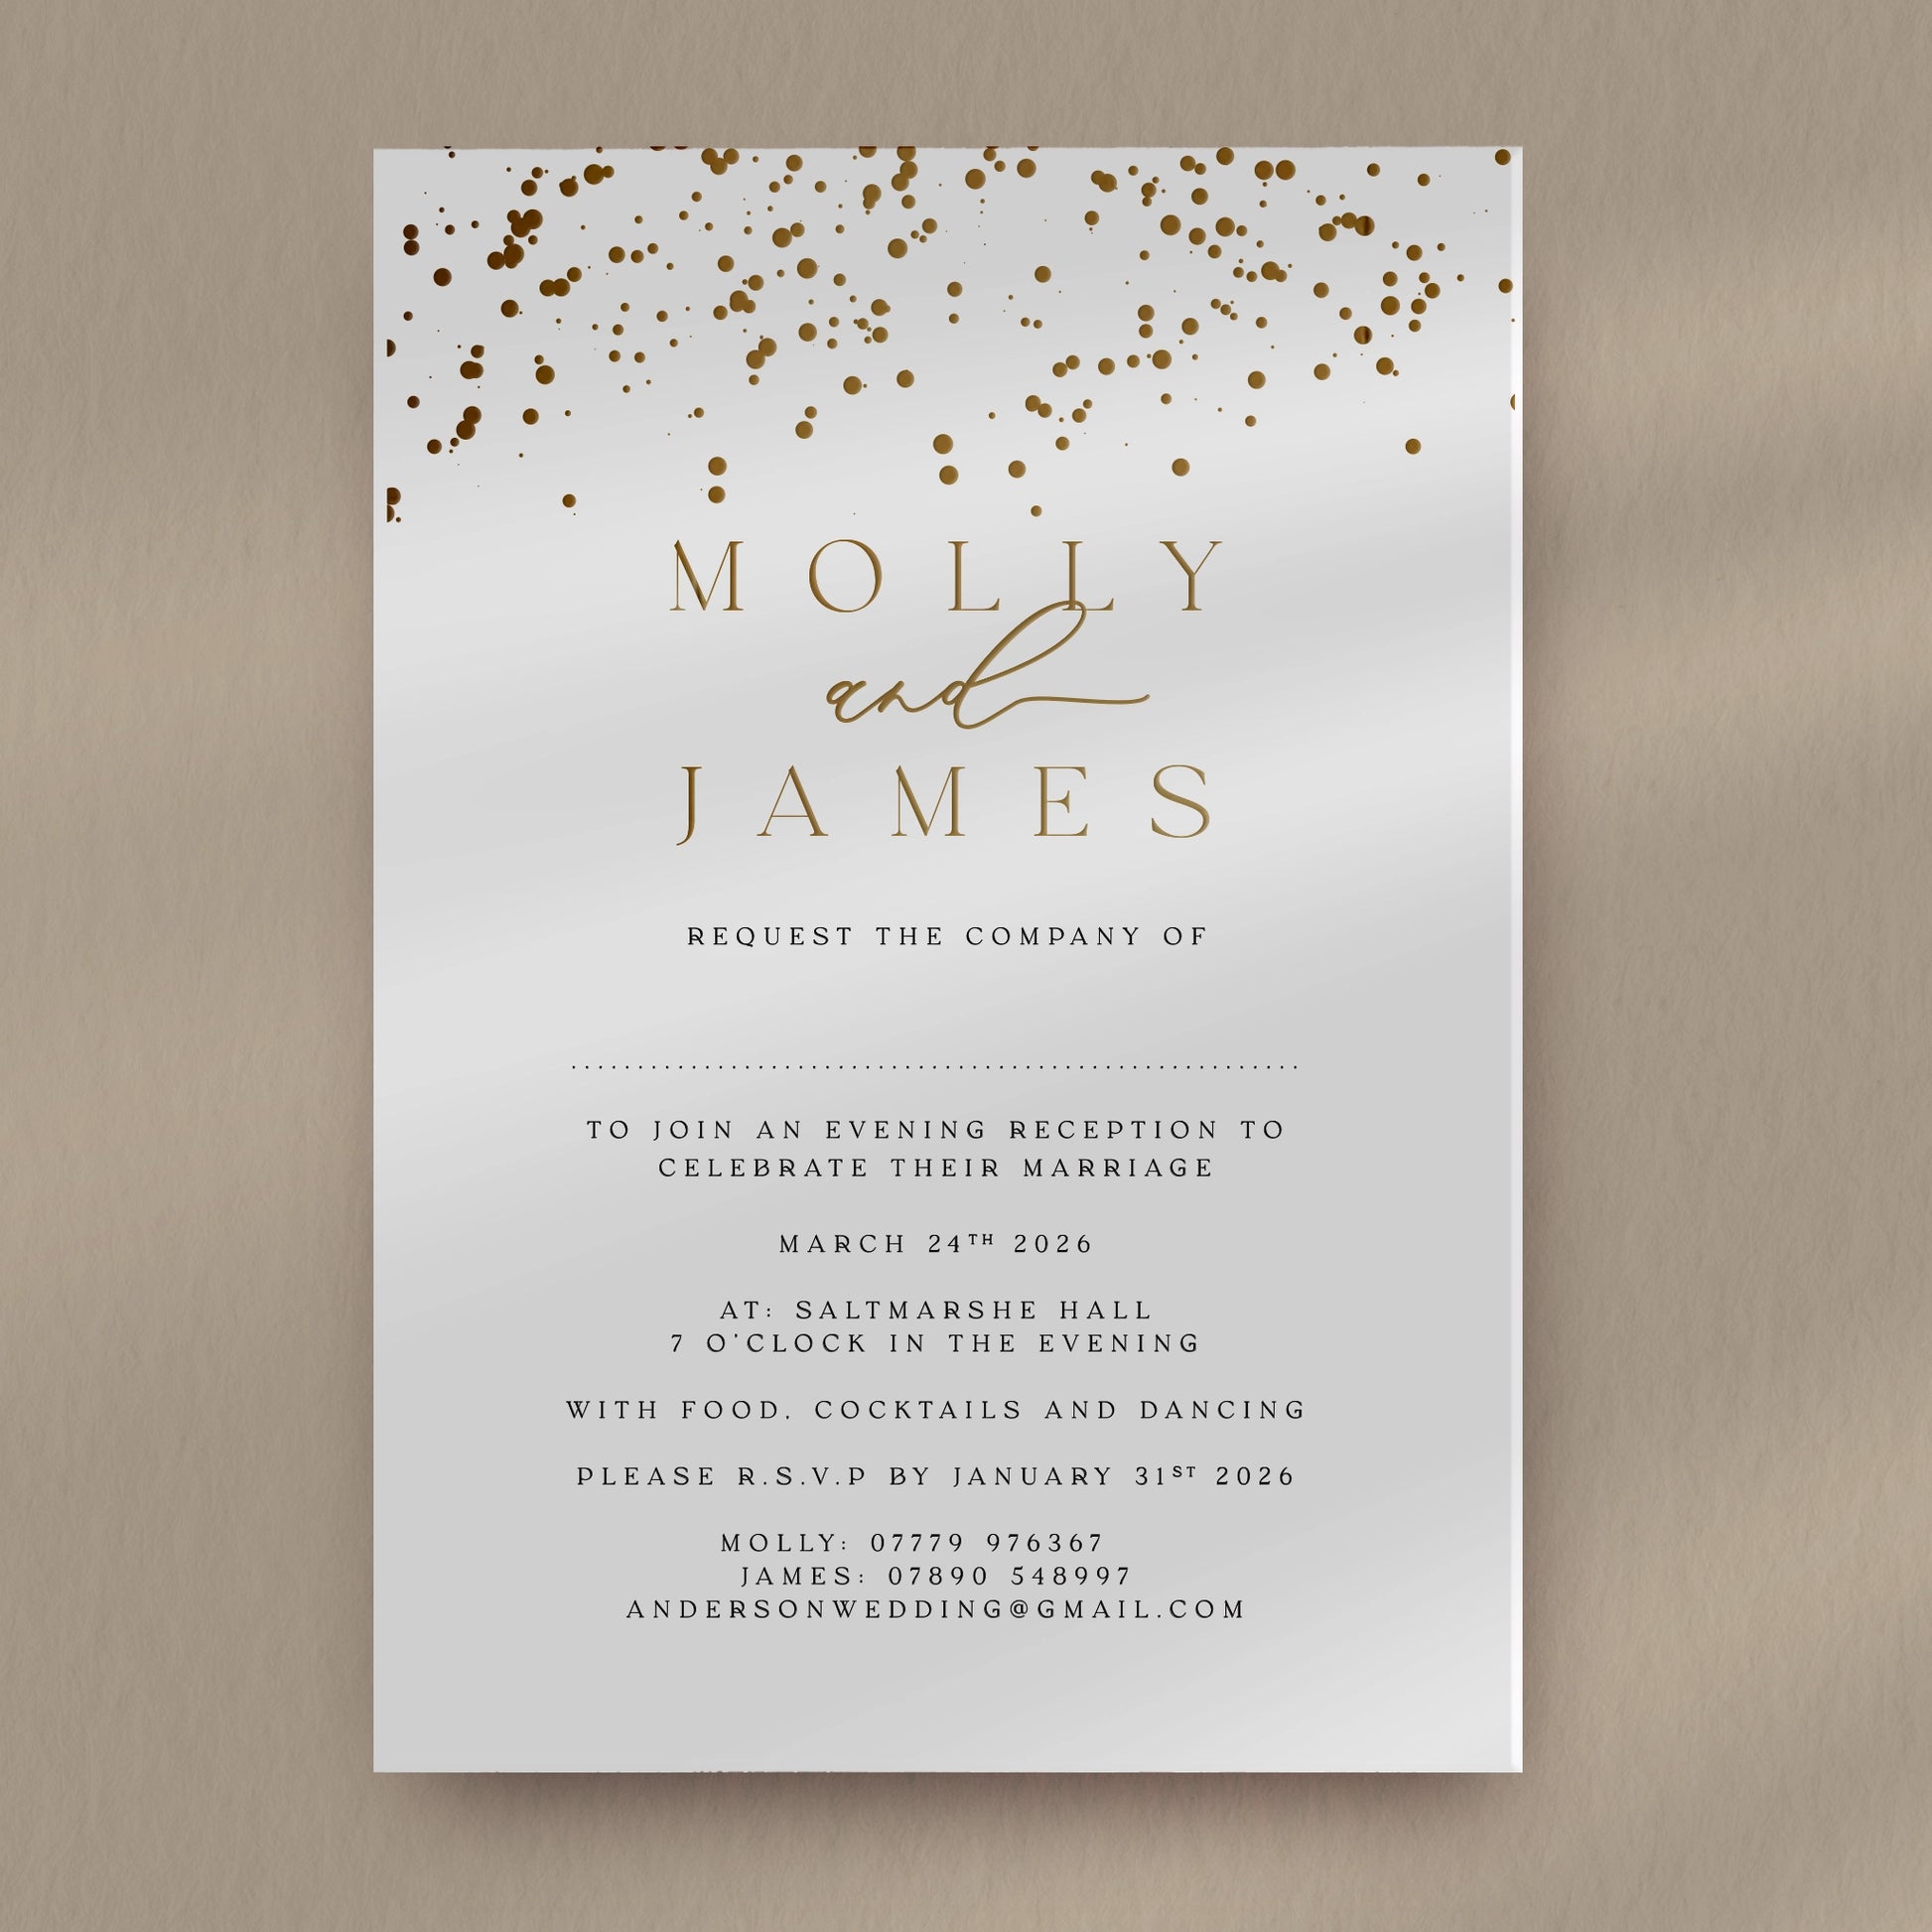 Evening Invitation Sample  Ivy and Gold Wedding Stationery Molly  